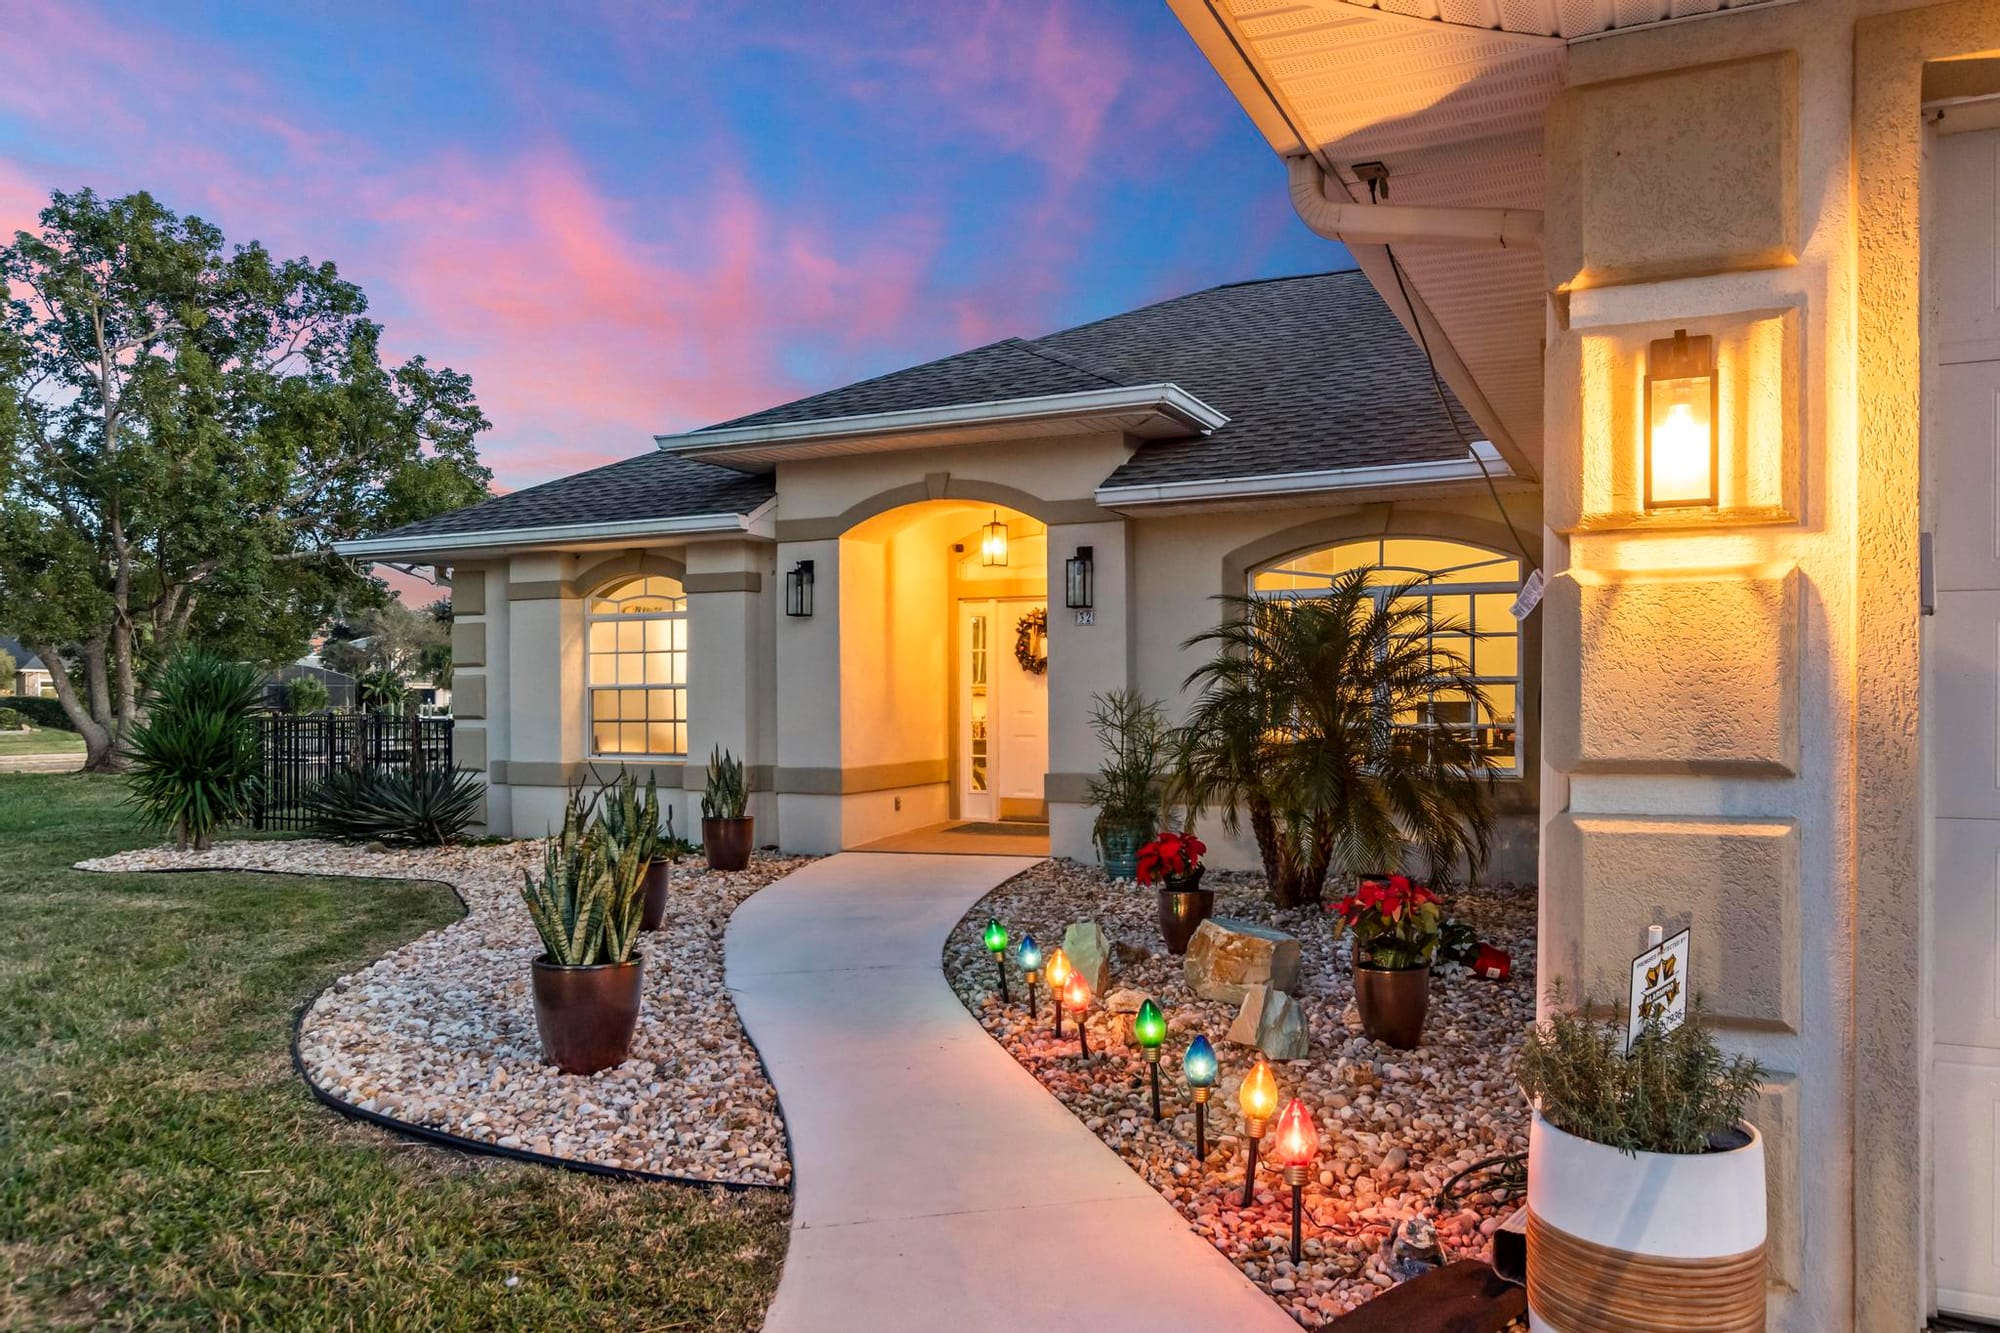 Virtual Open House Feature: Resort-Style Waterfront Retreat - Family Home in Palm Coast